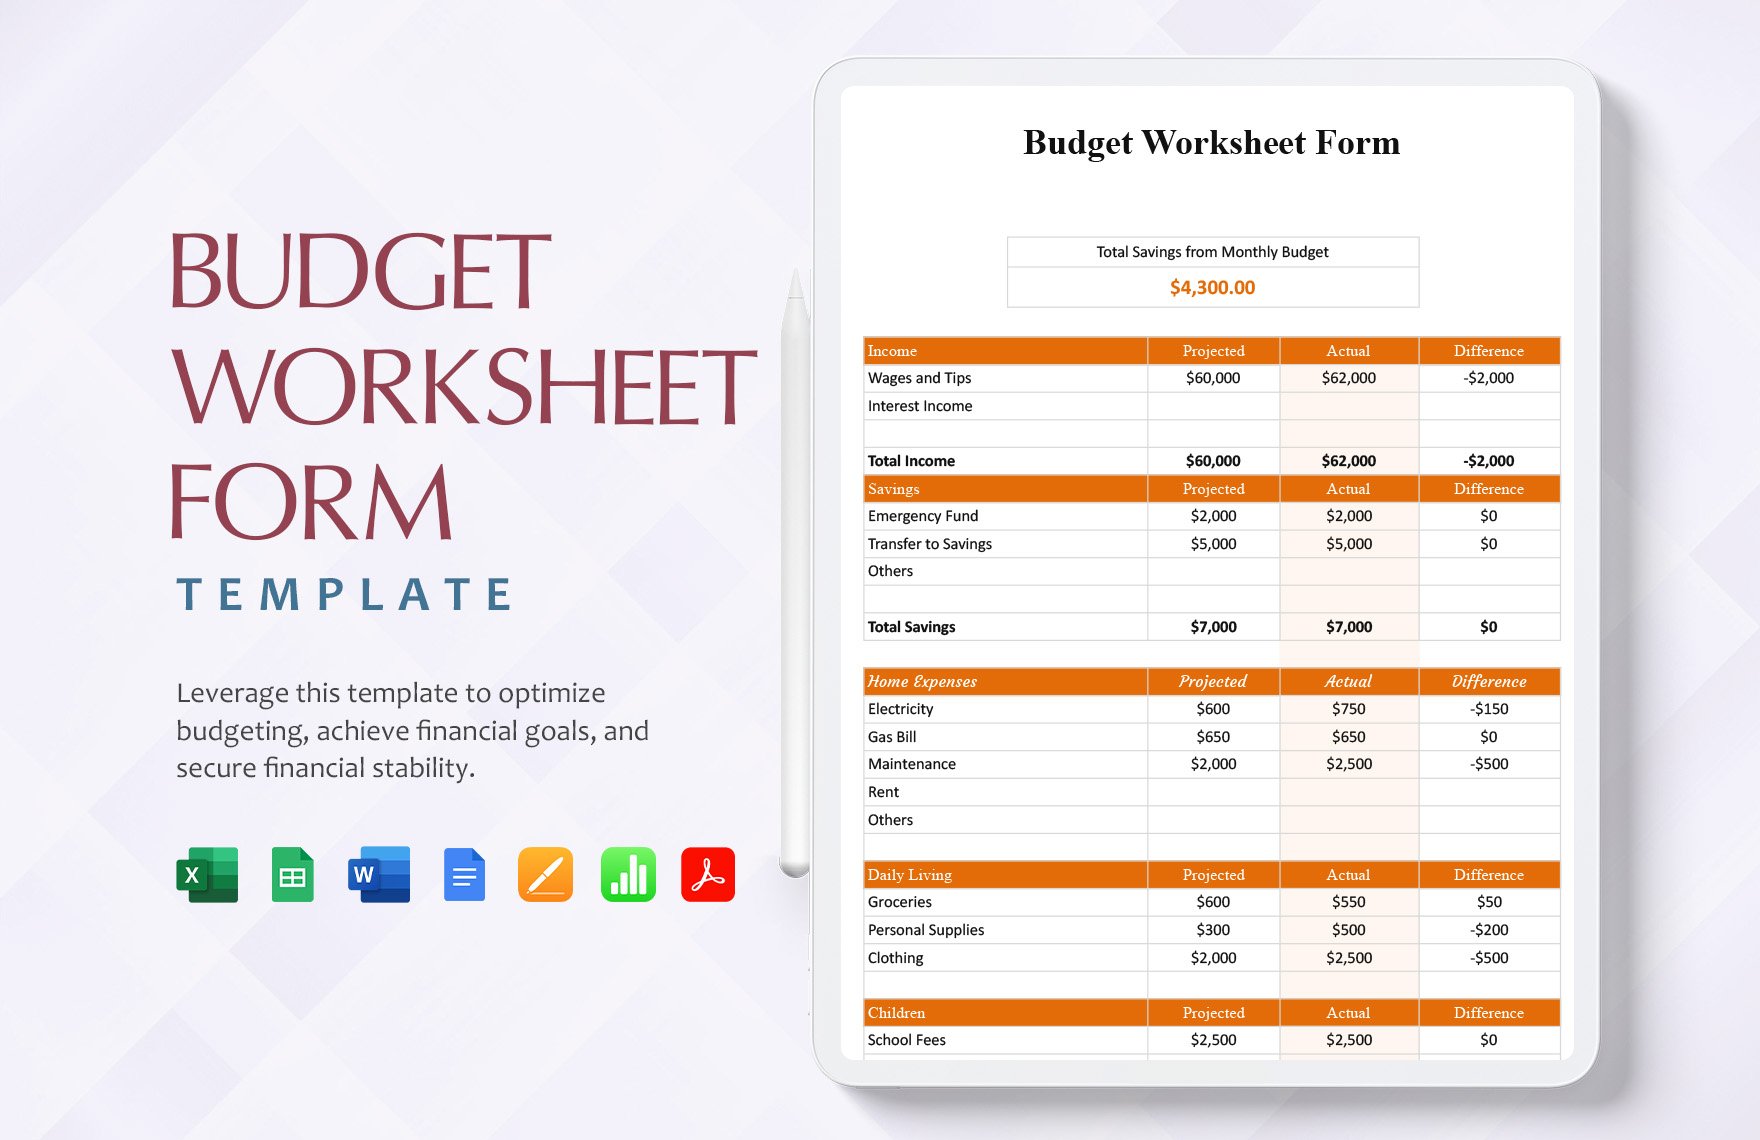 Budget Worksheet Form Template in Word, Google Docs, Excel, PDF, Google Sheets, Apple Pages, Apple Numbers